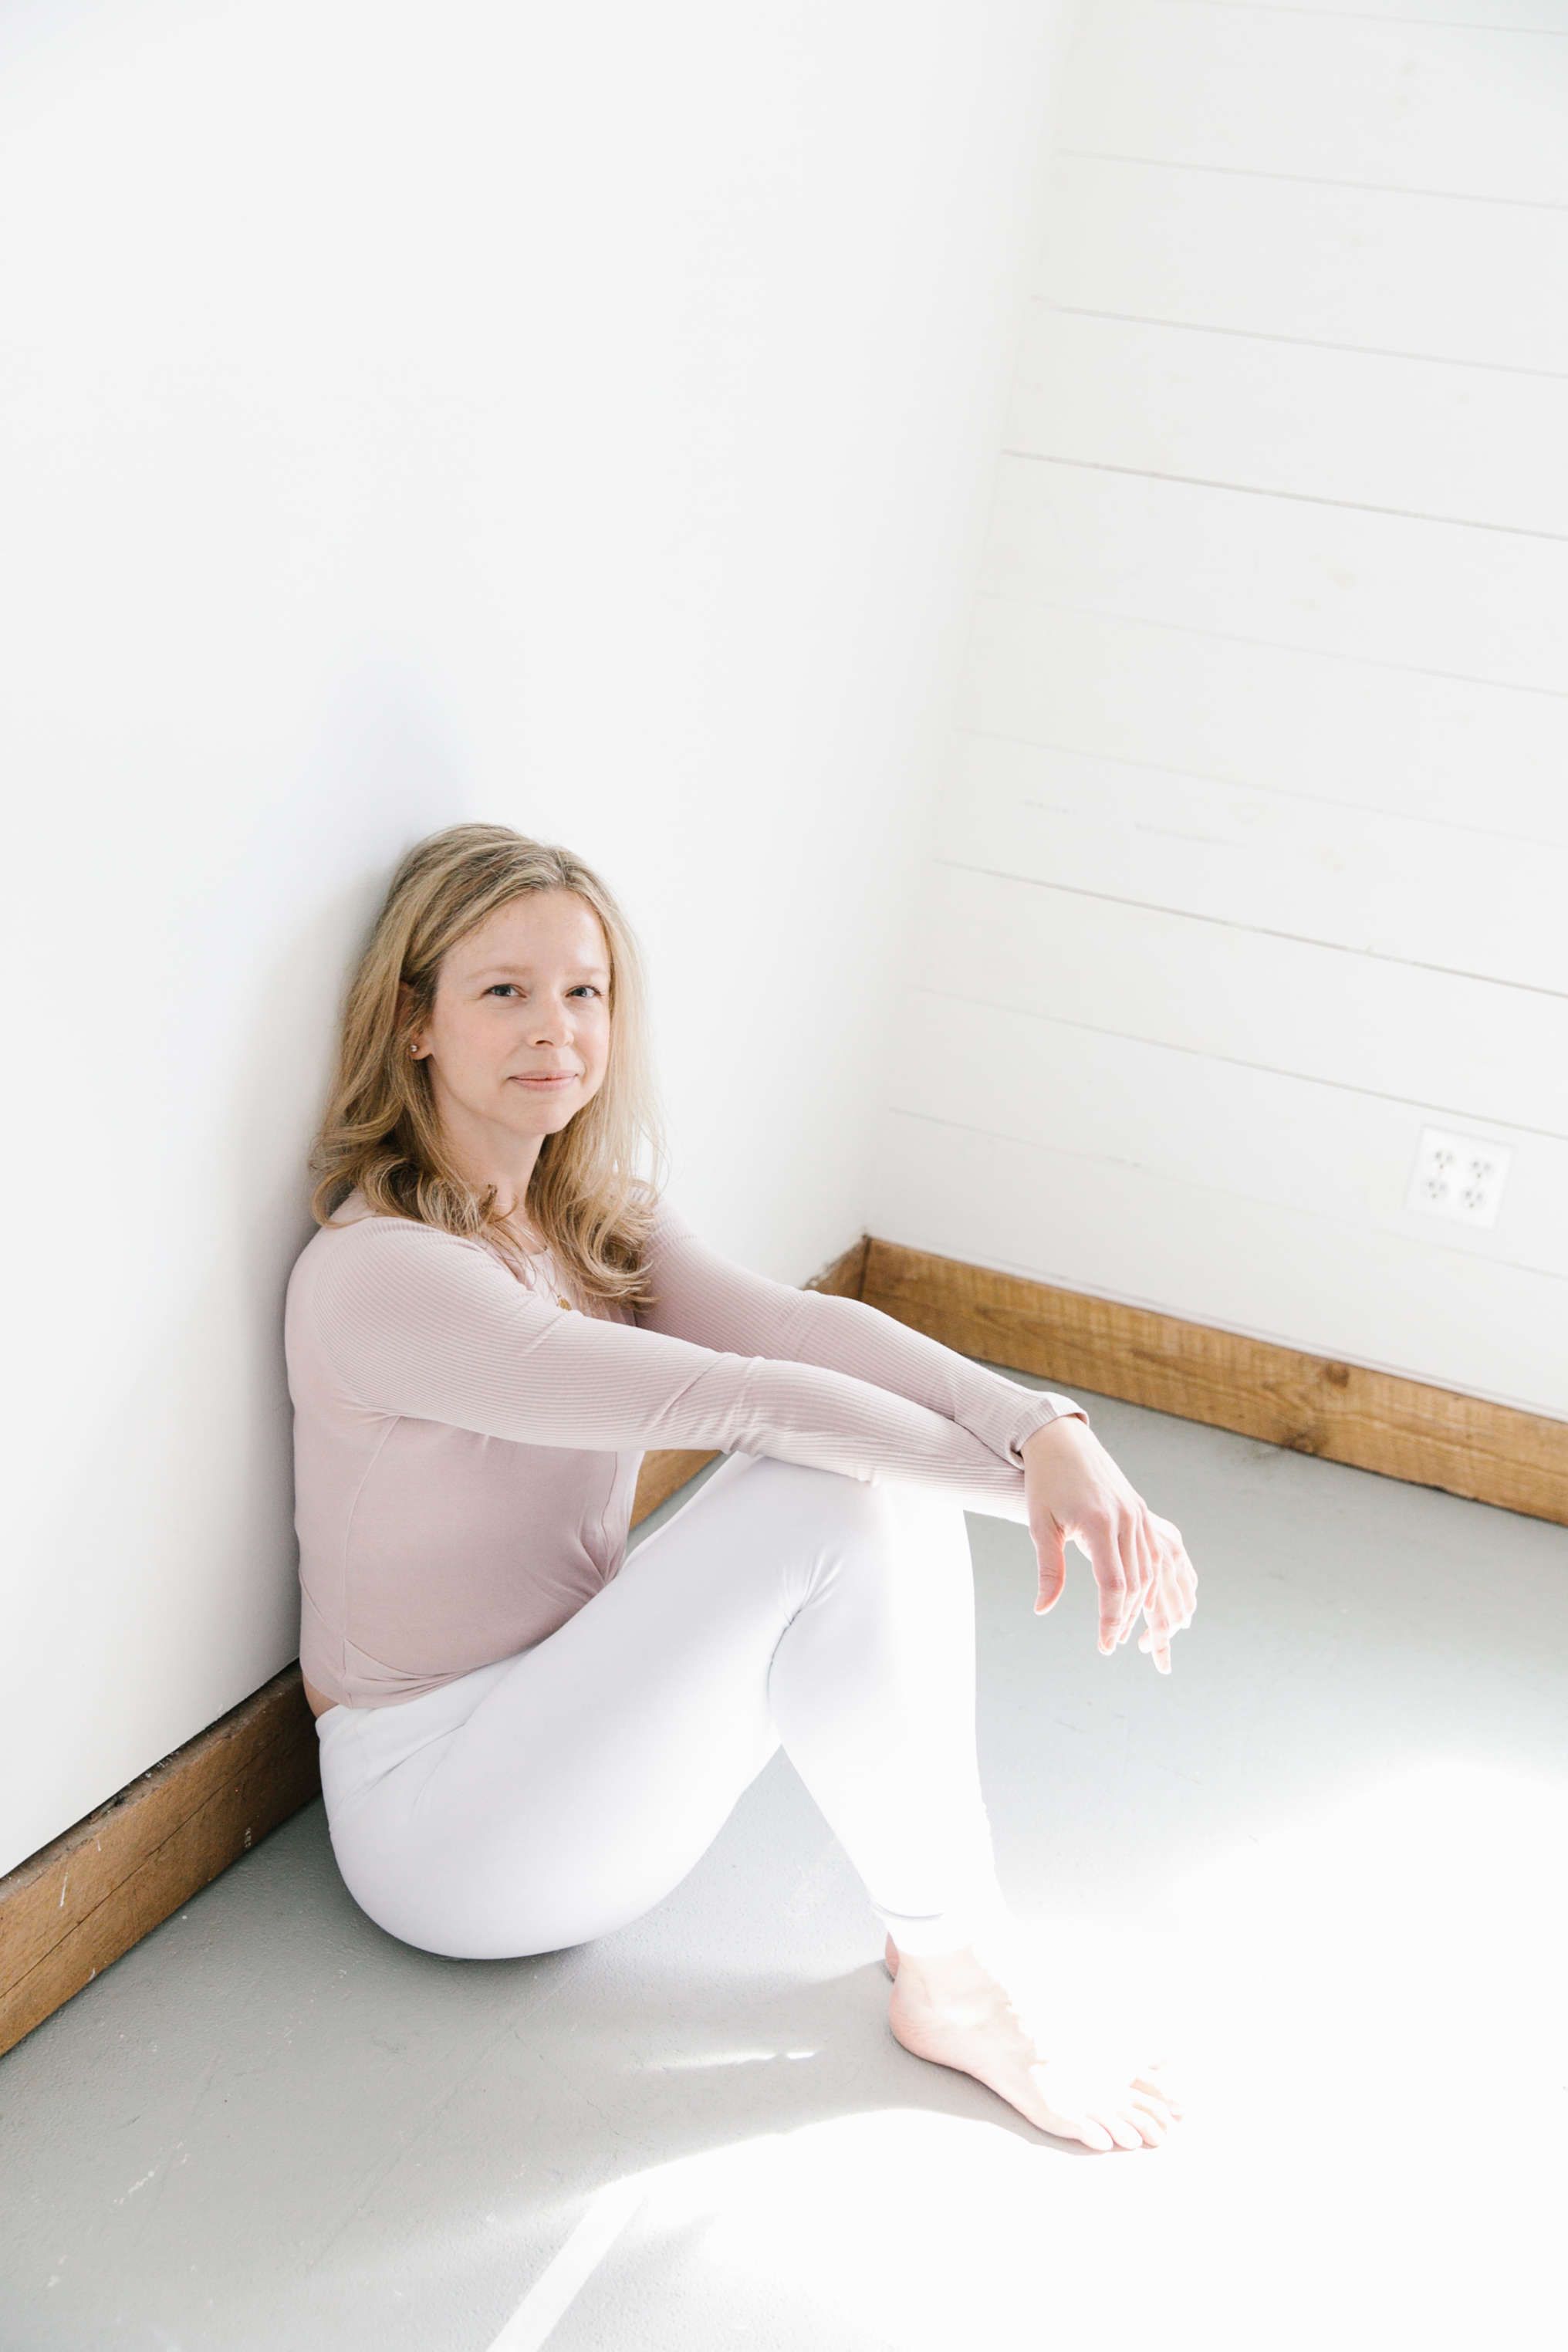 woman sitting on grey floor against white walls posing wearing white pants and a blush top